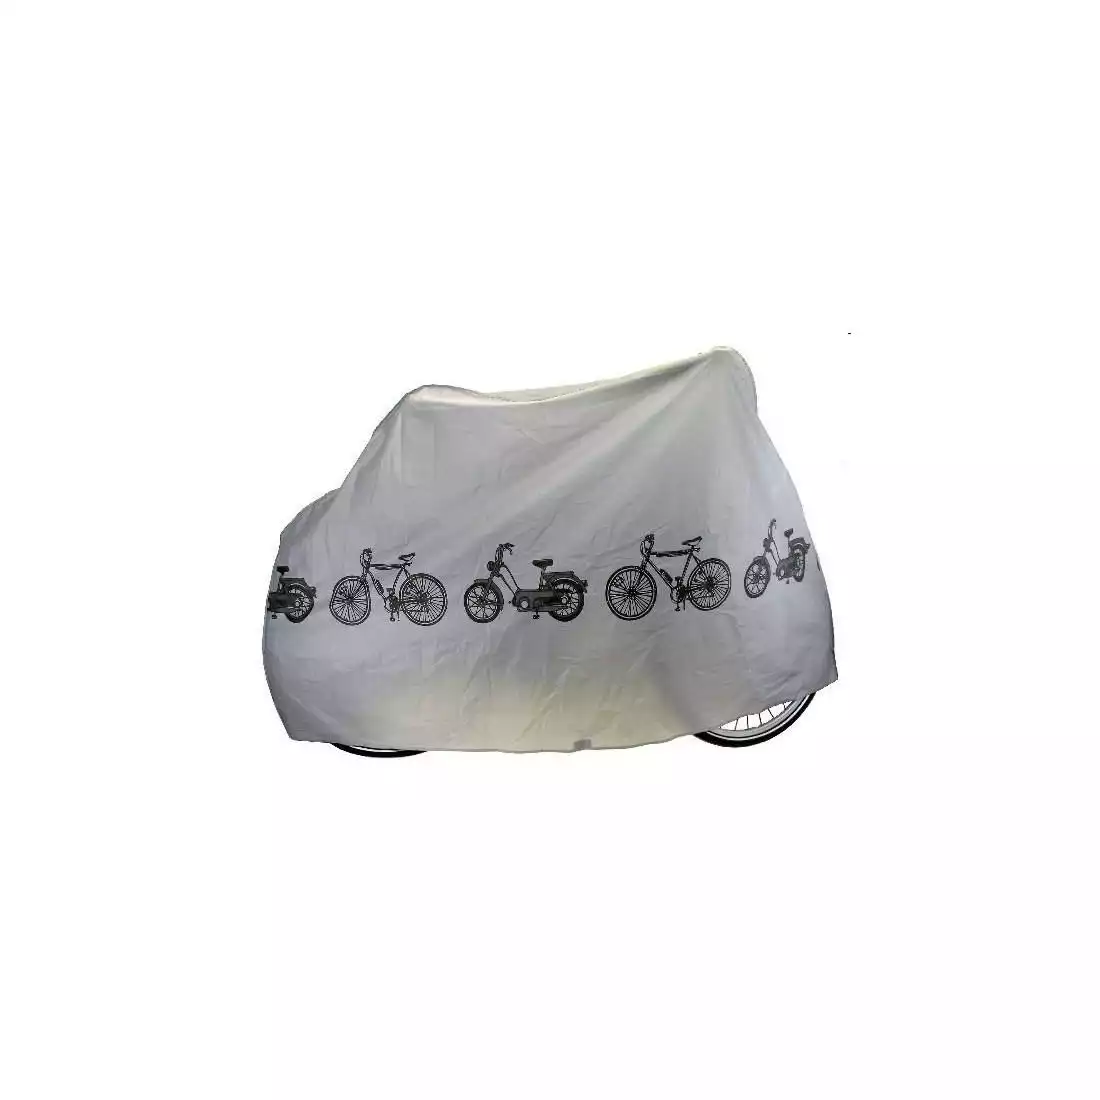 Bicycle cover 205x110x64, reinforced, gray